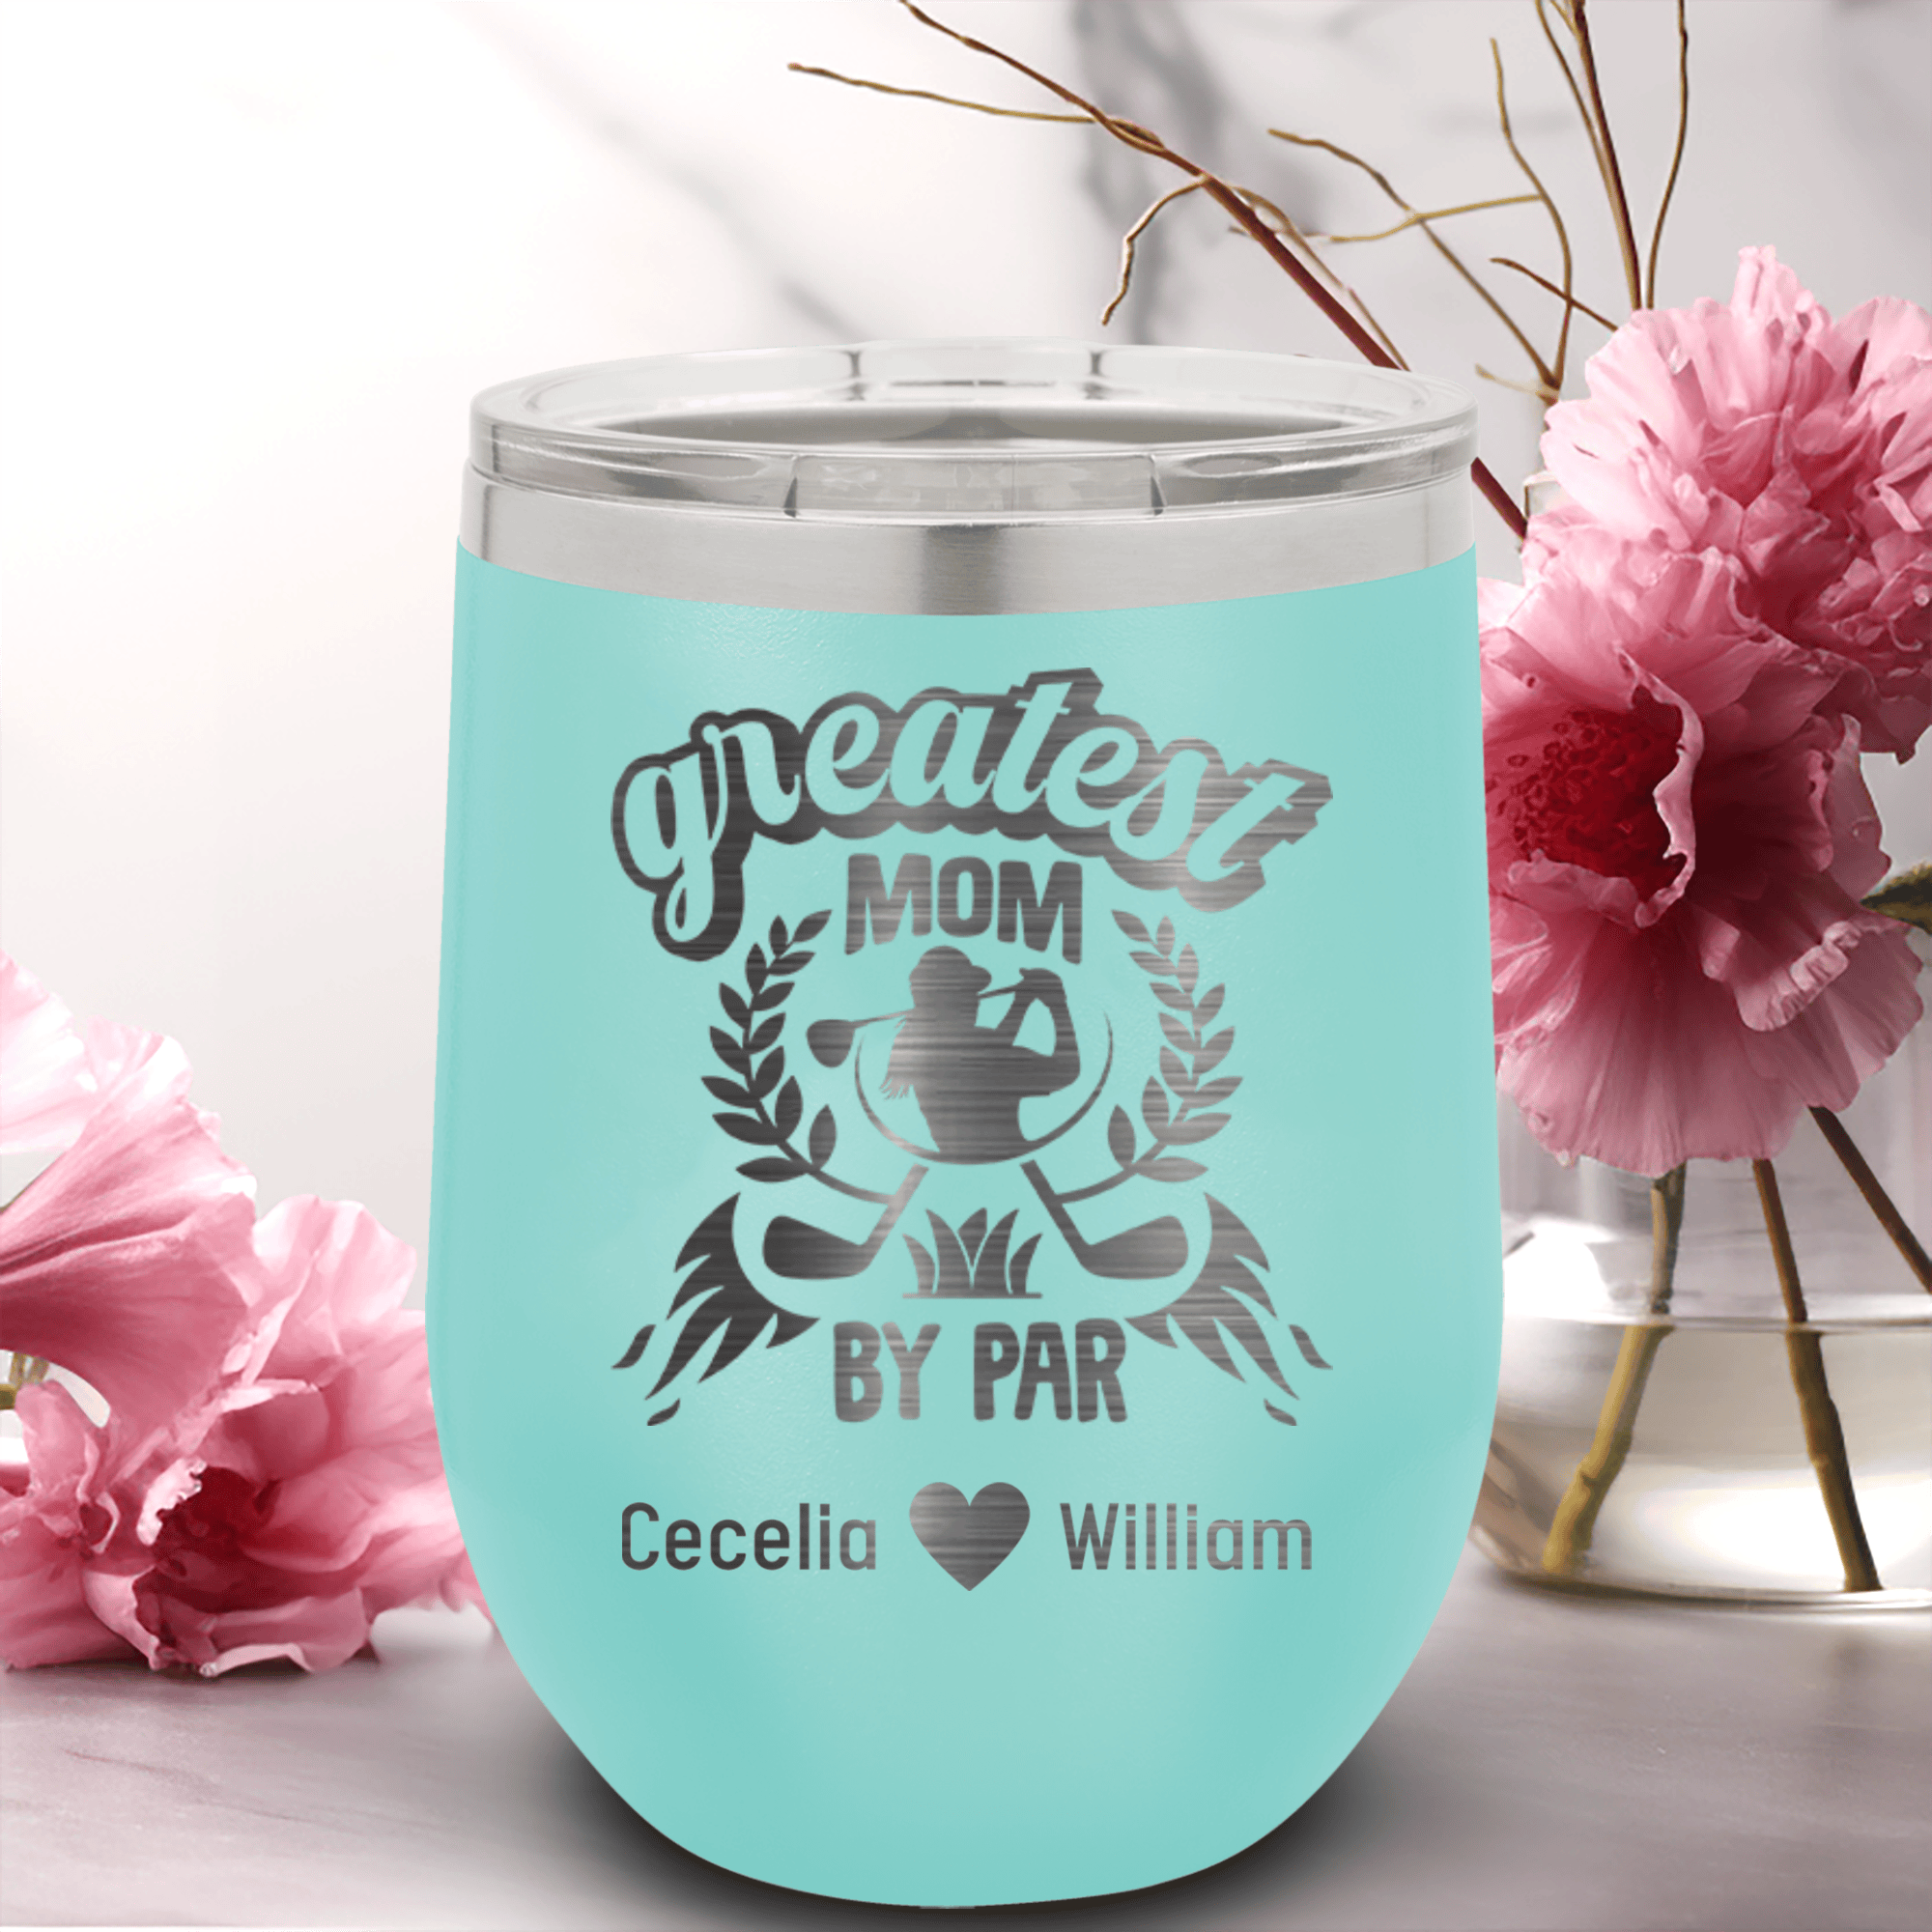 Teal Golf Mom Wine Tumbler With Greatest Golf Mom By Par Design